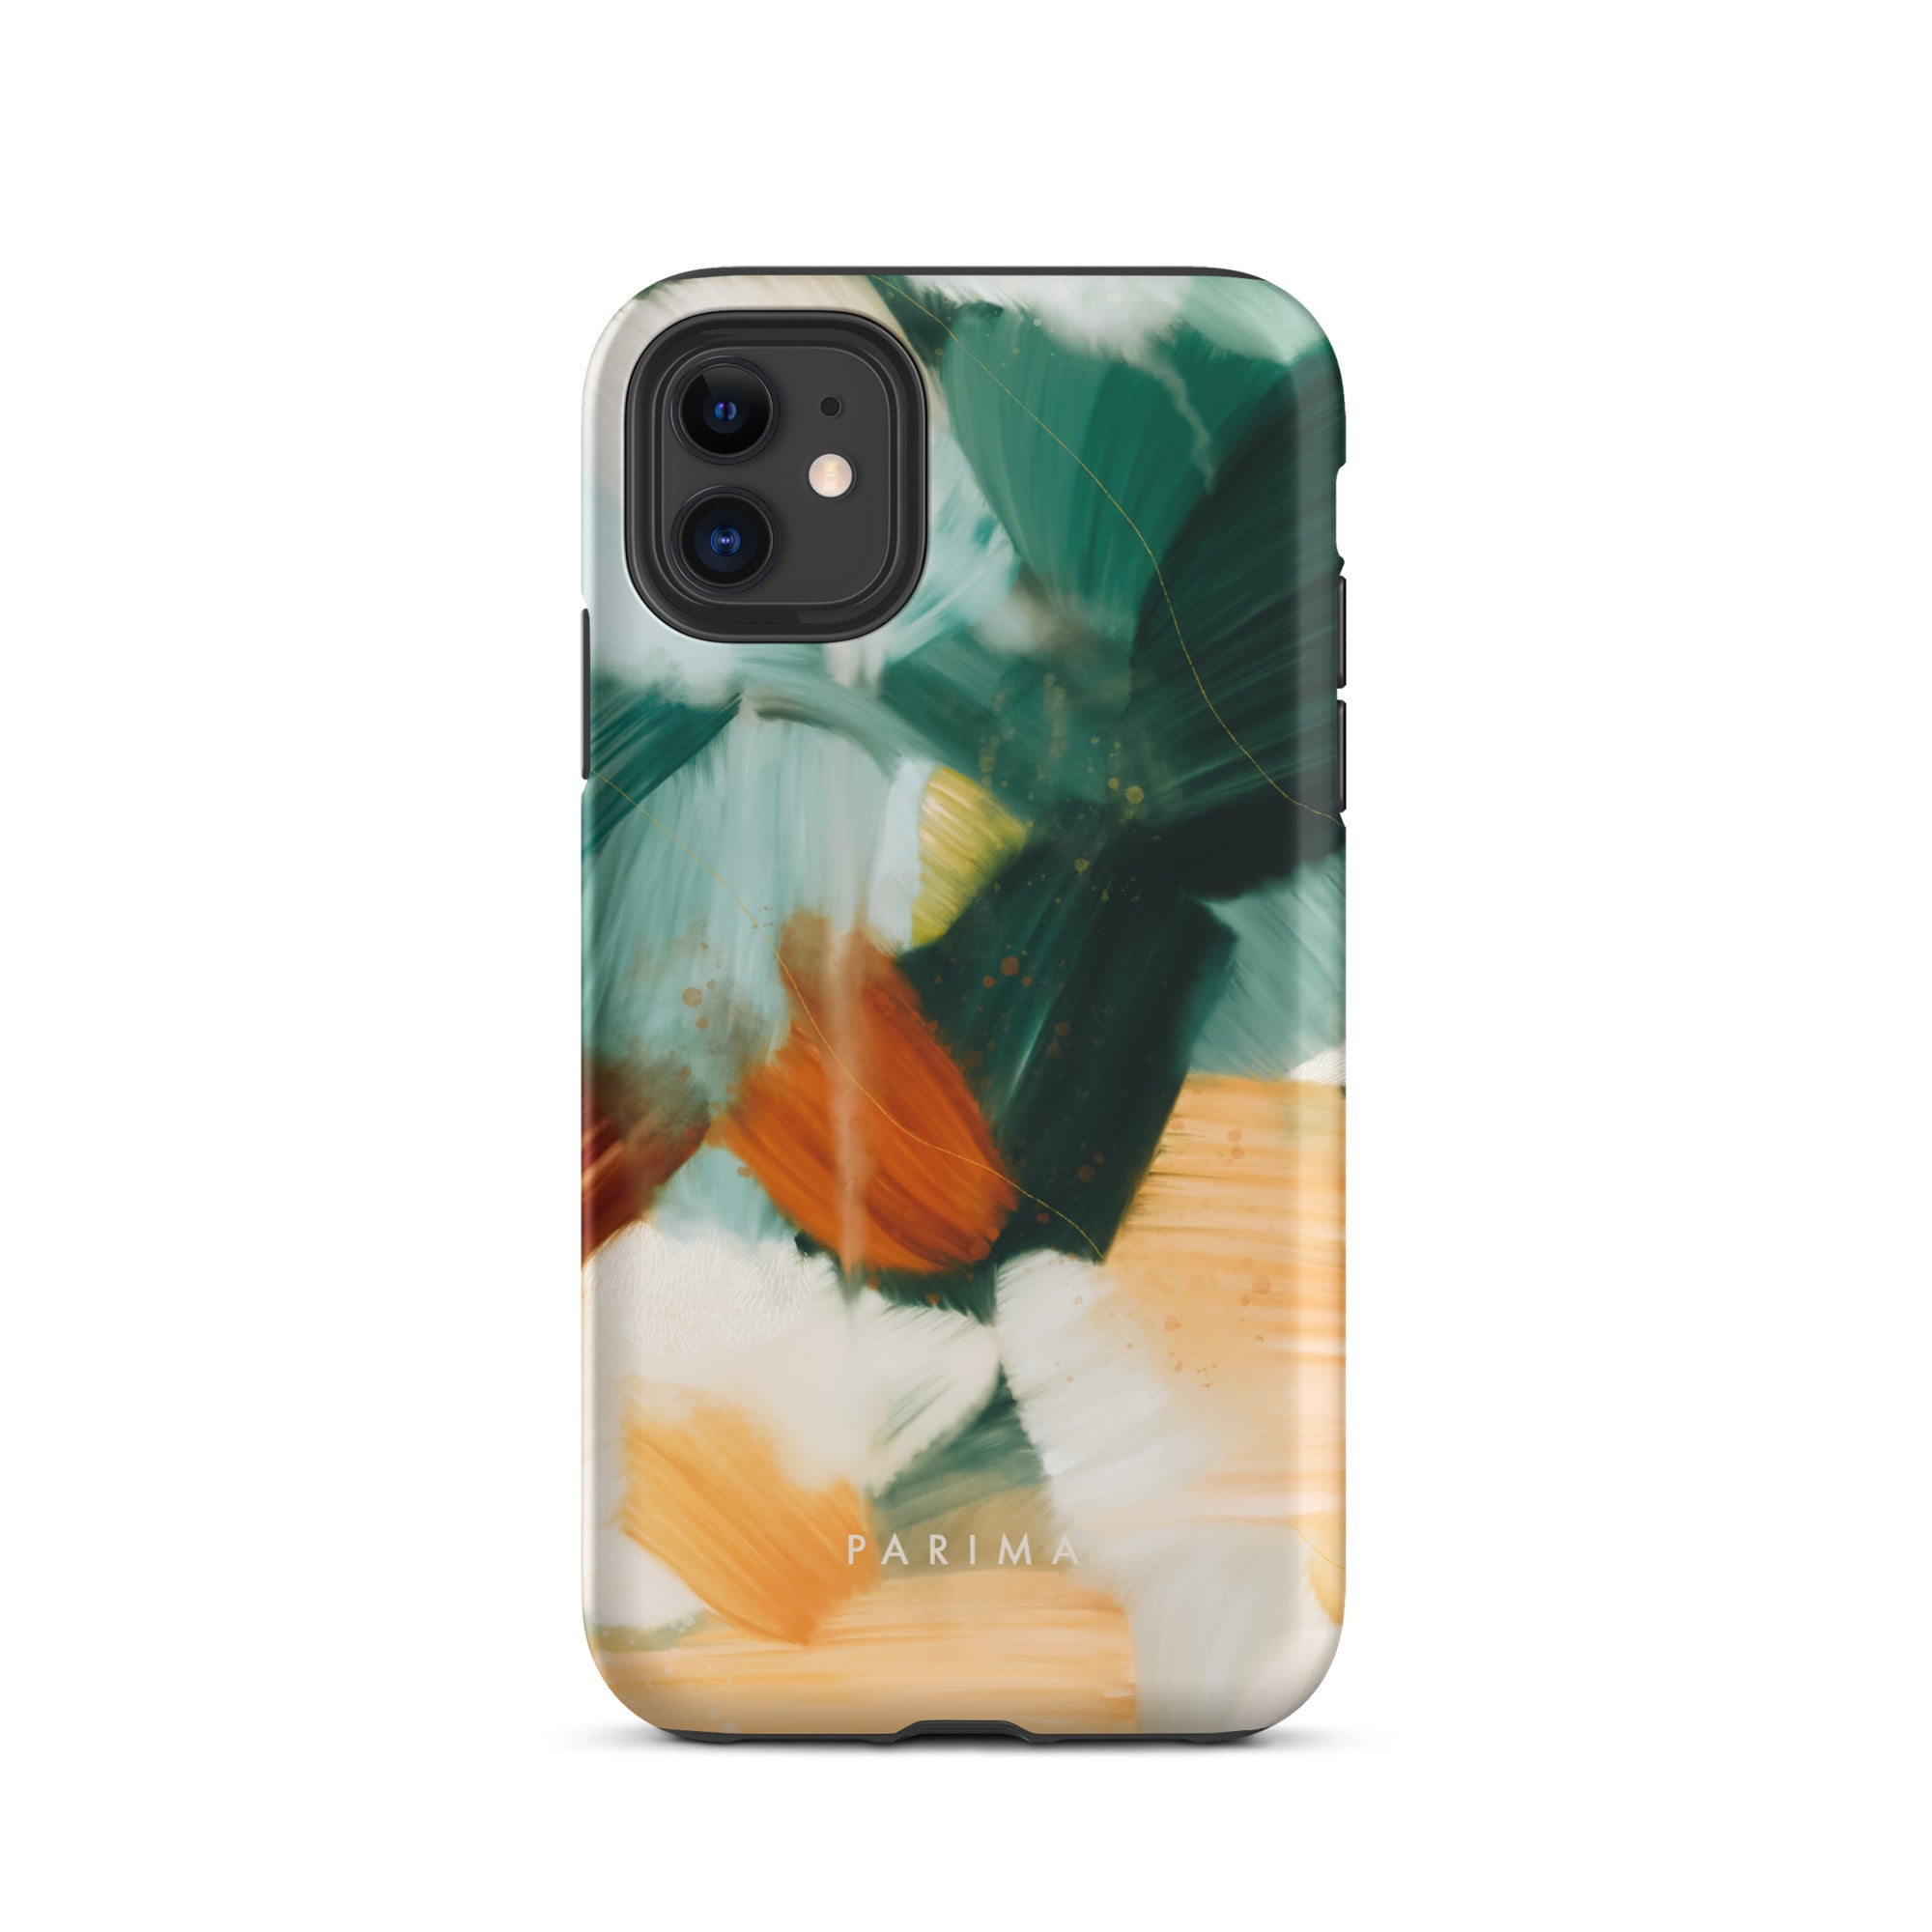 Meridian, green and orange abstract art on iPhone 11 tough case by Parima Studio